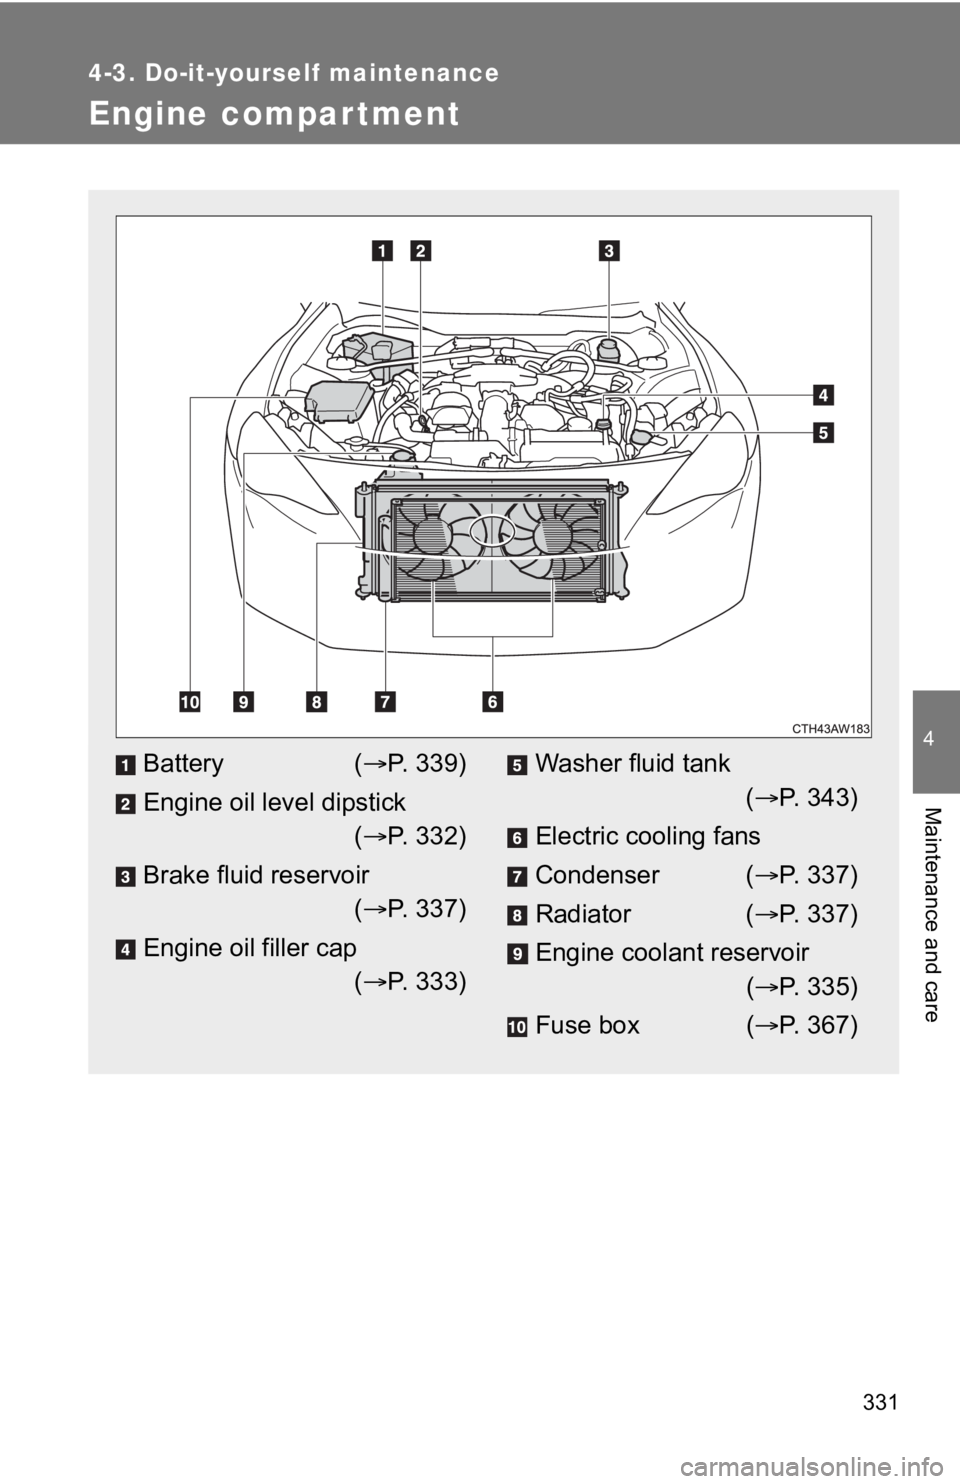 TOYOTA 86 2020  Owners Manual 331
4-3. Do-it-yourself maintenance
4
Maintenance and care
Engine compar tment
Battery( P.   3 3 9 )
Engine oil level dipstick ( P.   3 3 2 )
Brake fluid reservoir ( P.   3 3 7 )
Engine oil f